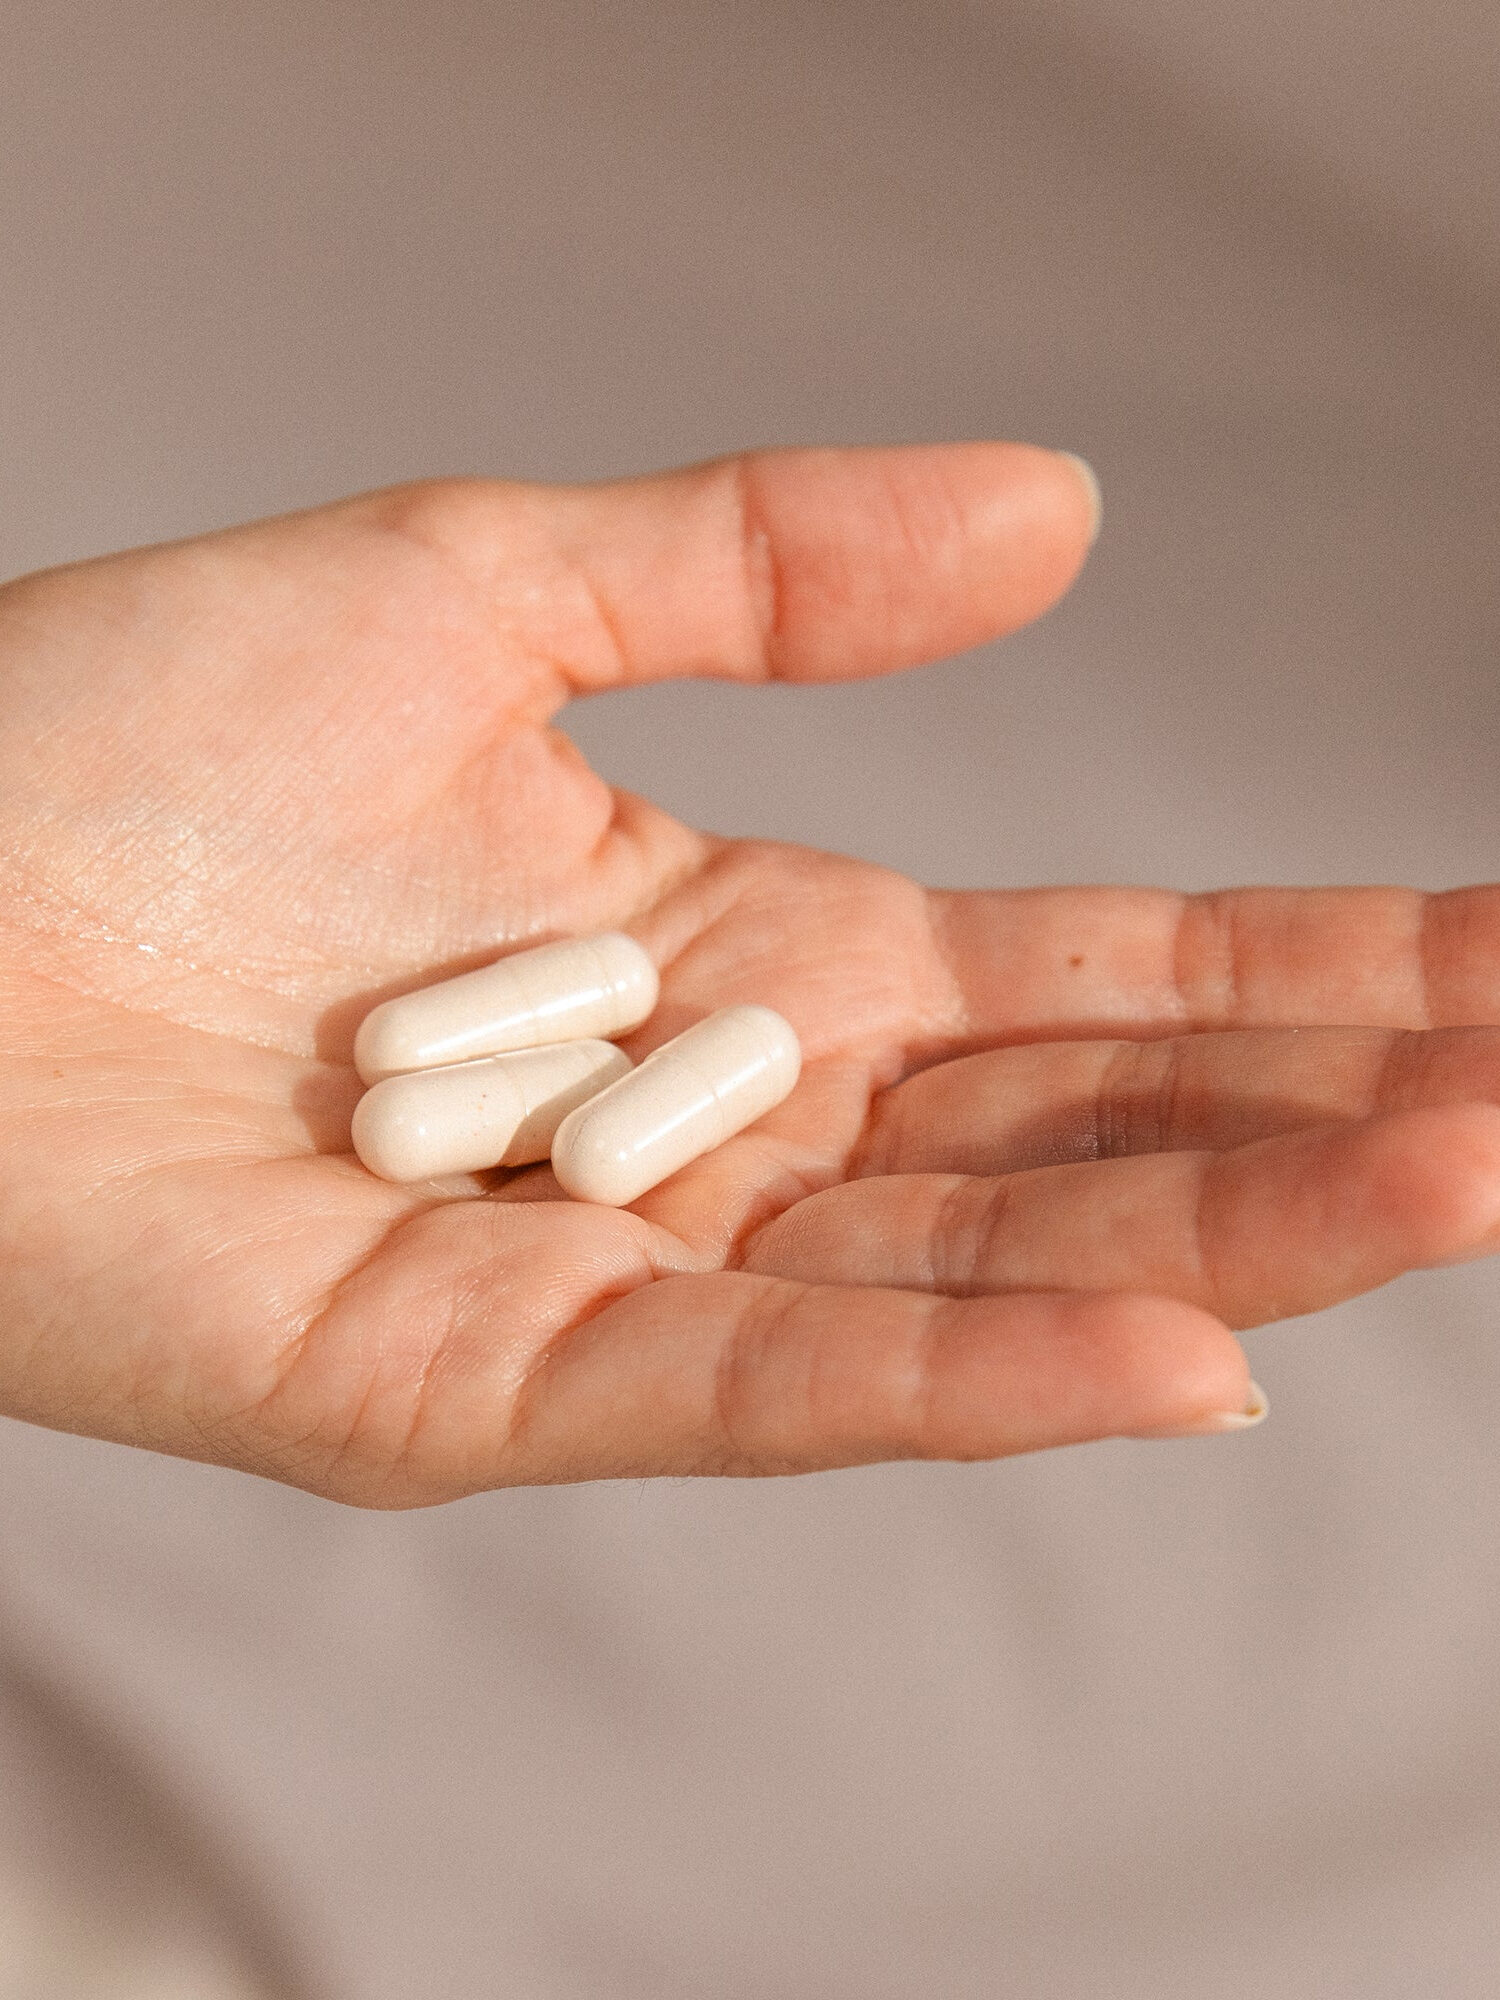 A hand holding three Needed Multivitamin capsules.